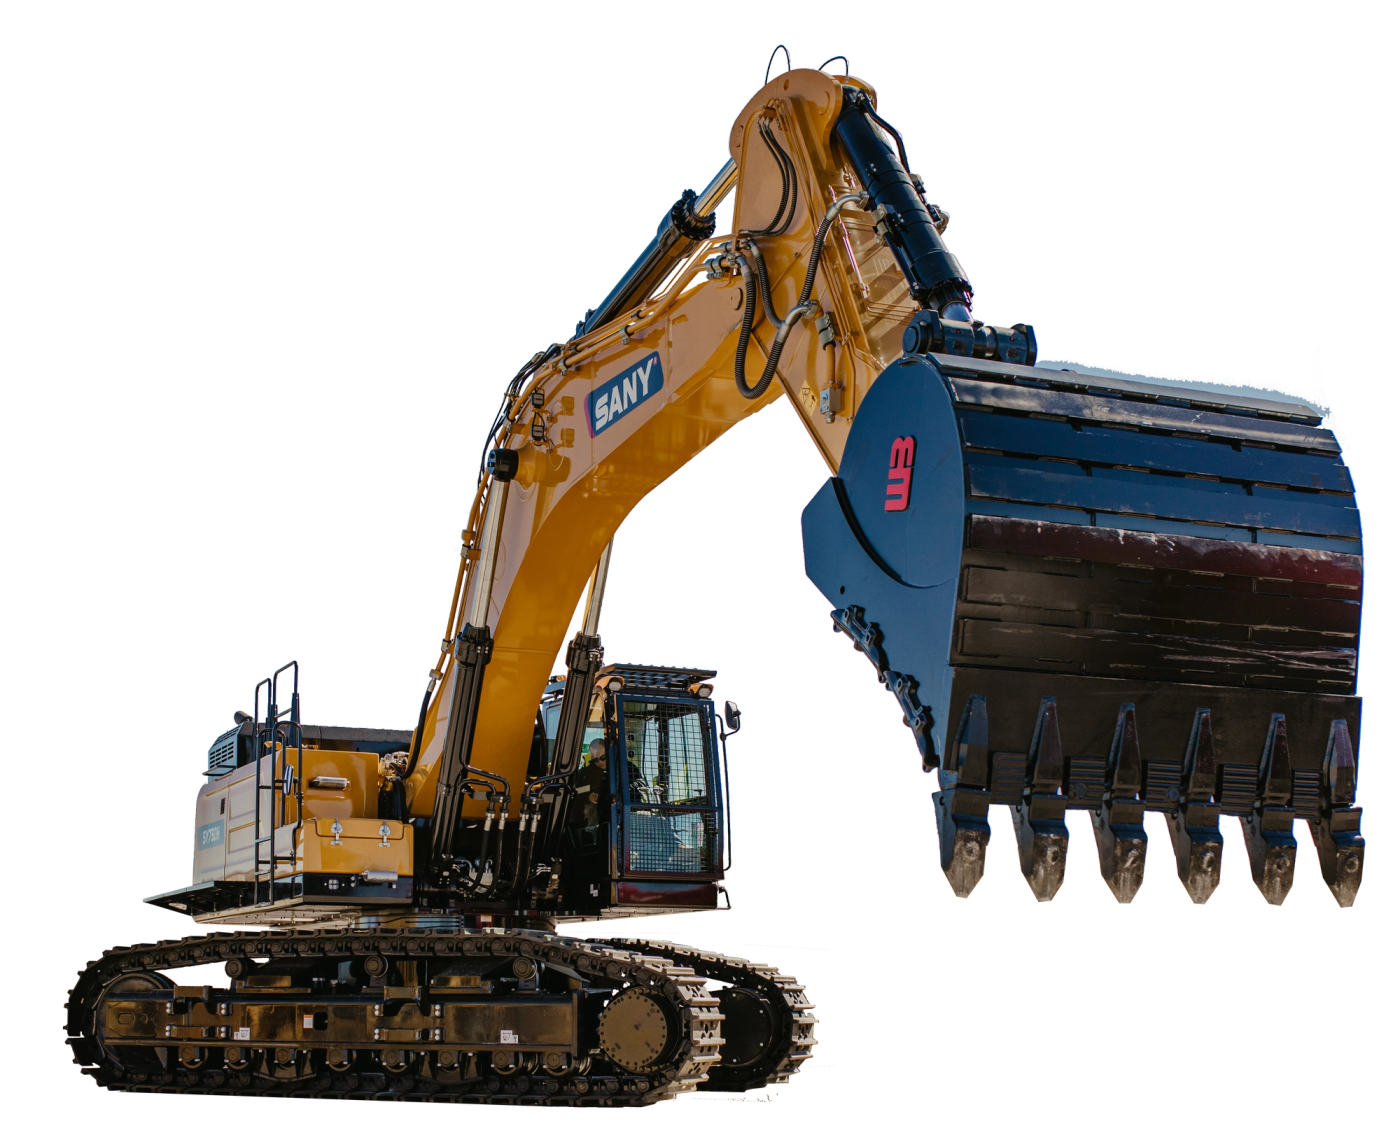 sany-sy750h-excavator-for-sale-or-rent